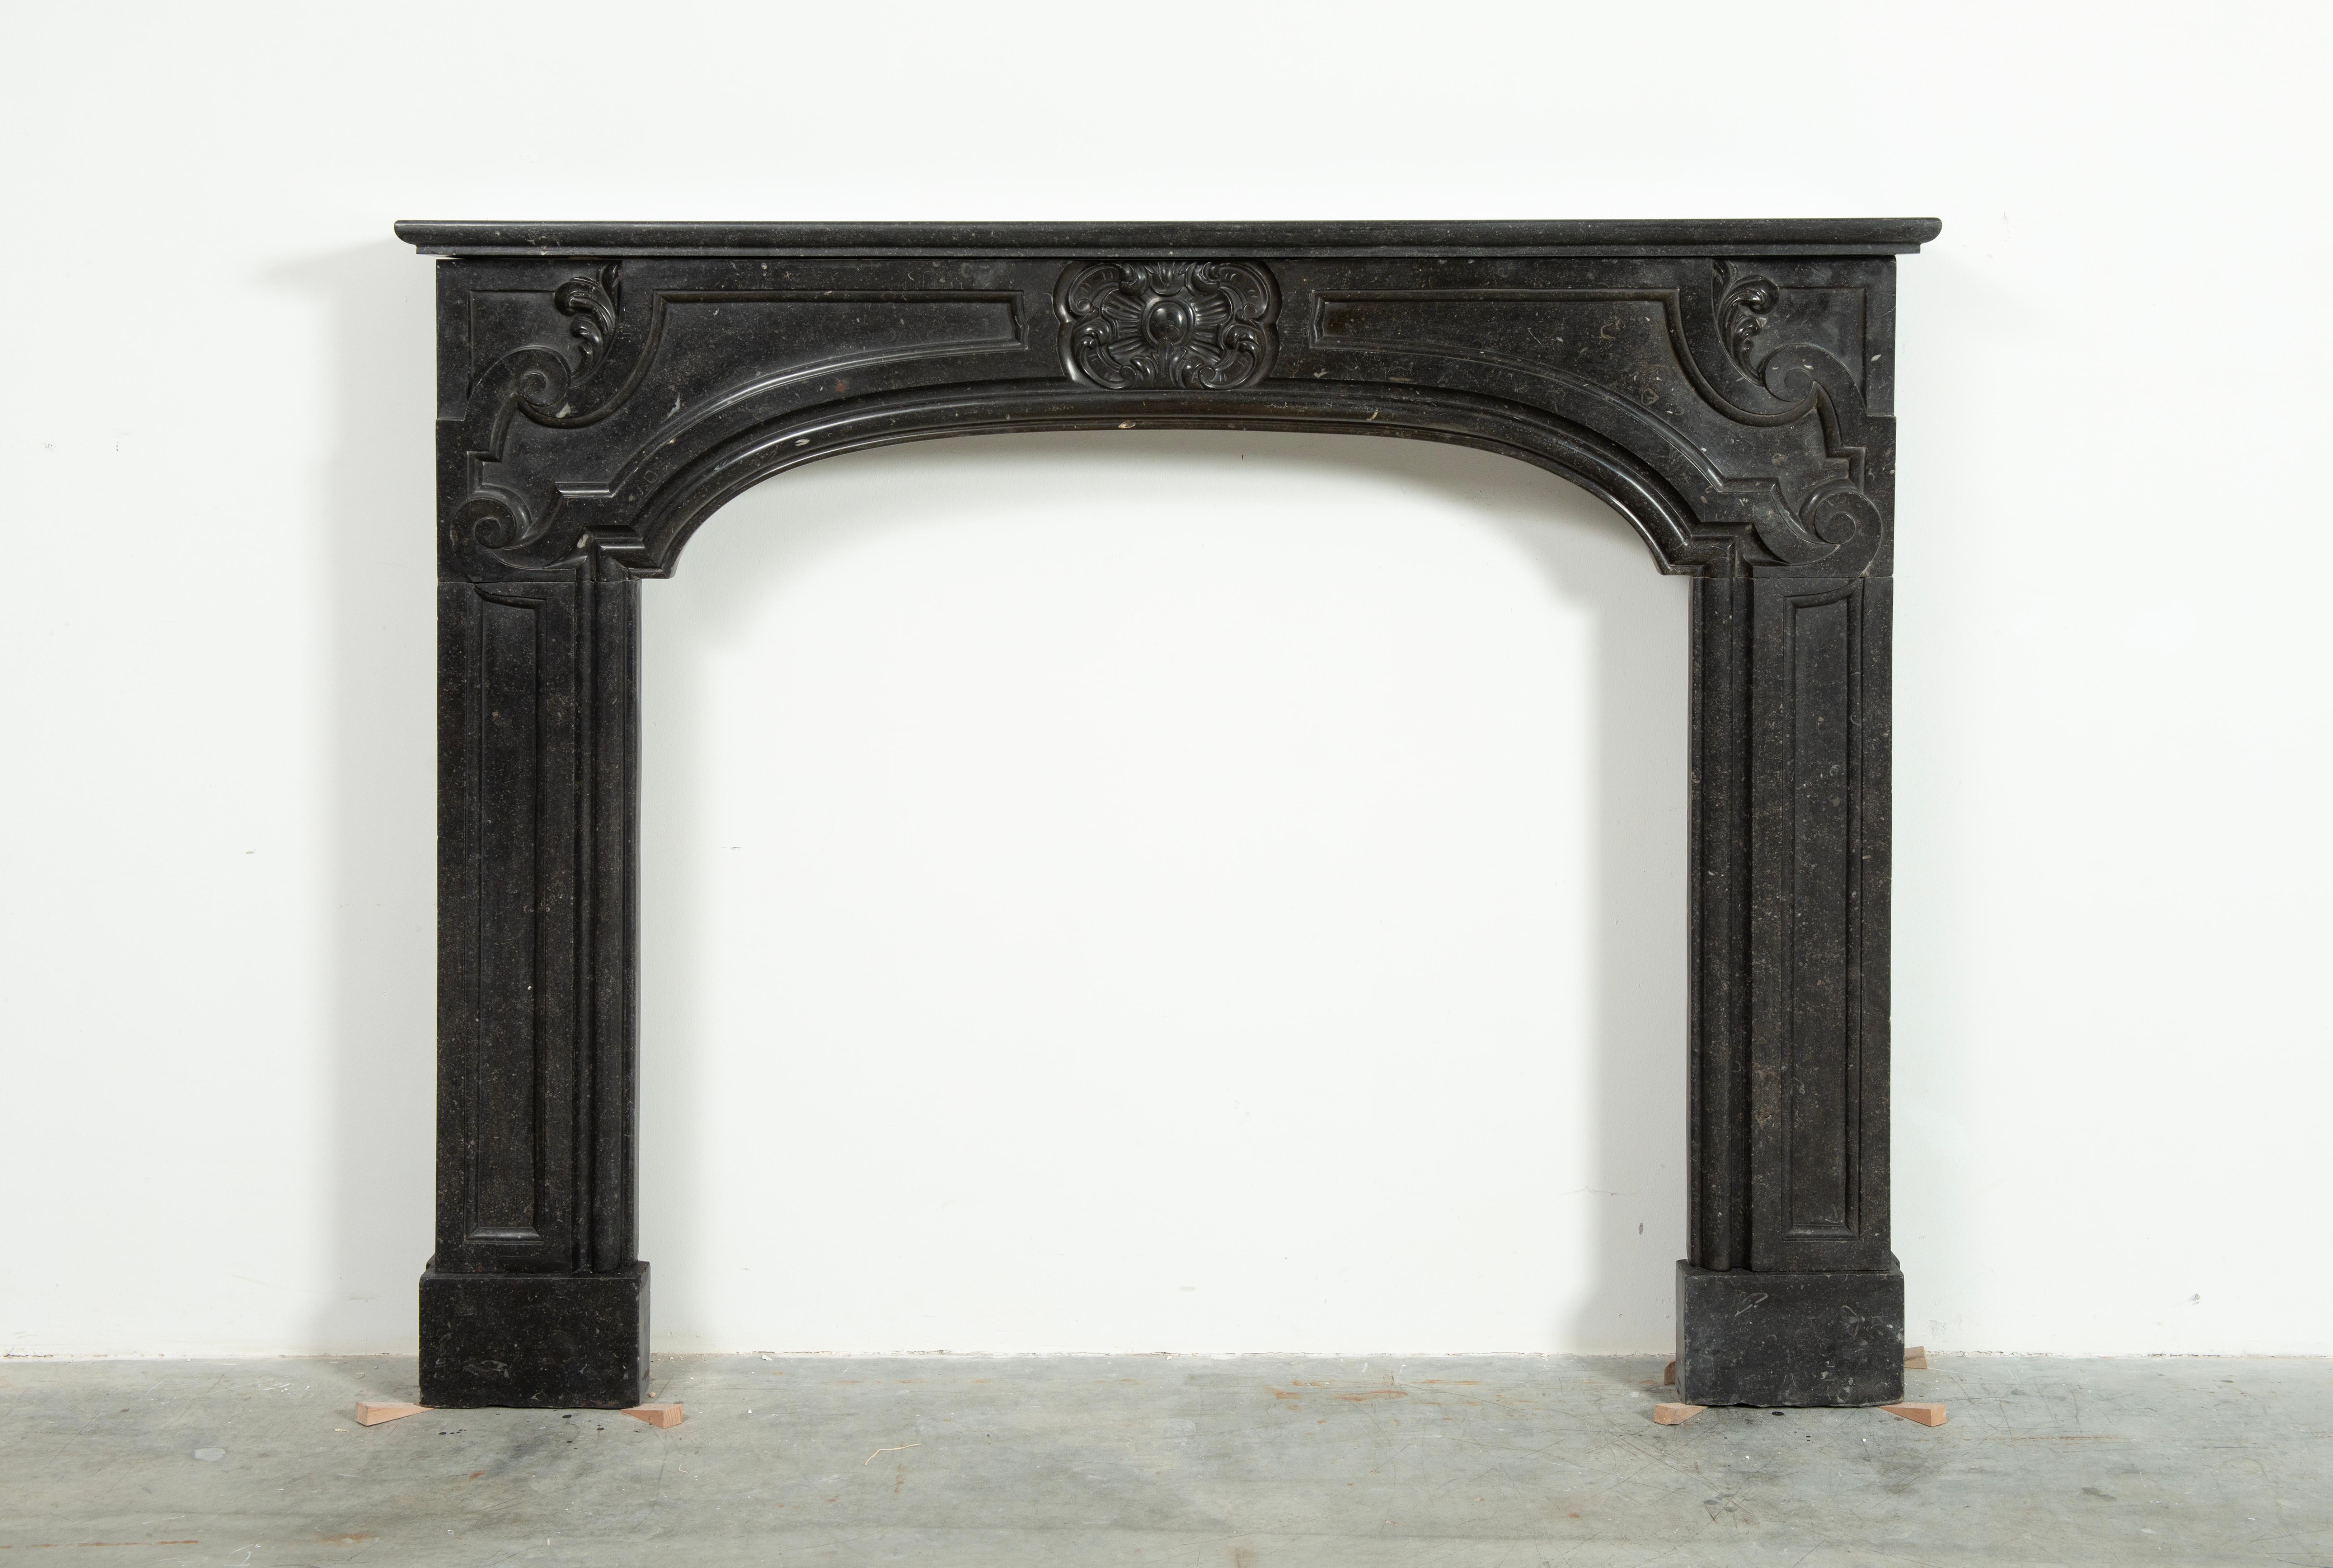 Antique Dutch Louis XIV Fireplace Mantel.

Monumental 18th Century Dutch fireplace in beautiful deep colored Belgian bluestone.
The perfect shimmer and color really make this stand out in any room and situation.

The thick profiled topshelf rest on